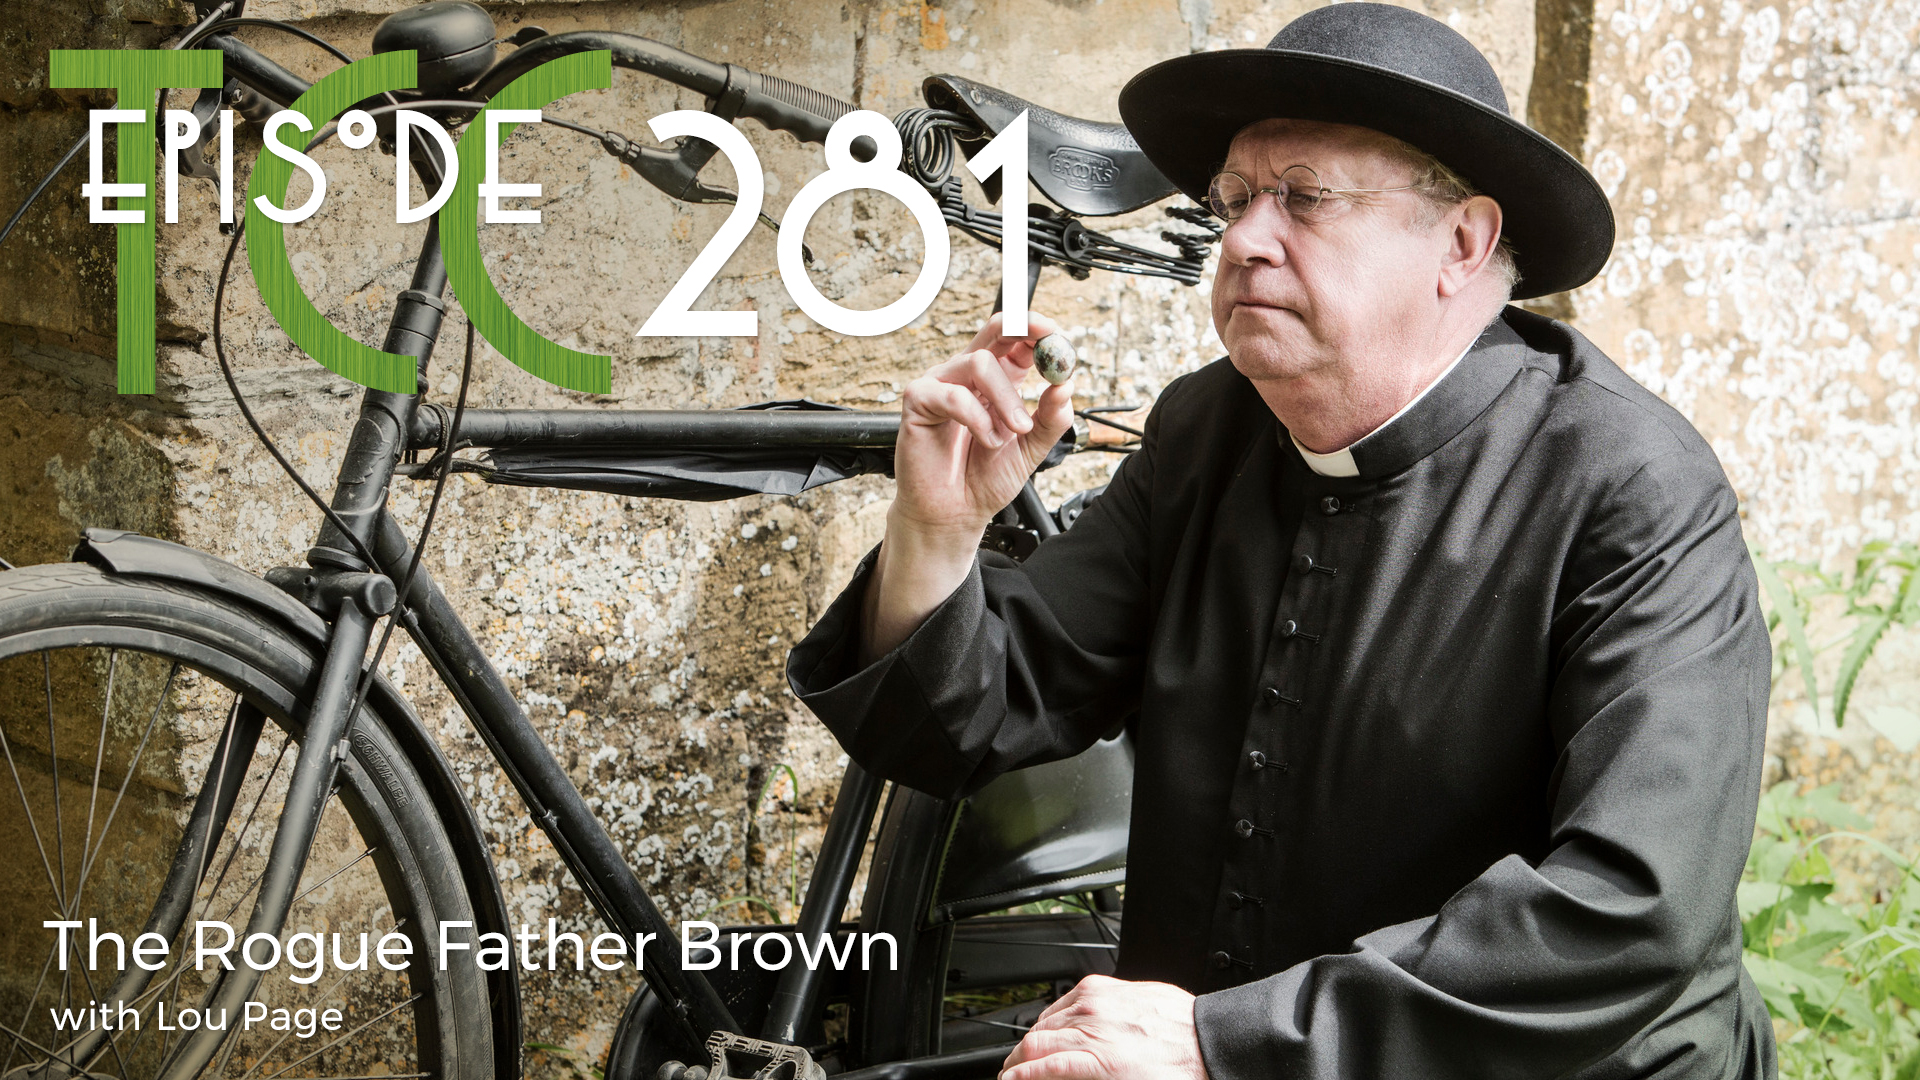 The Citadel Cafe 281: The Rogue Father Brown